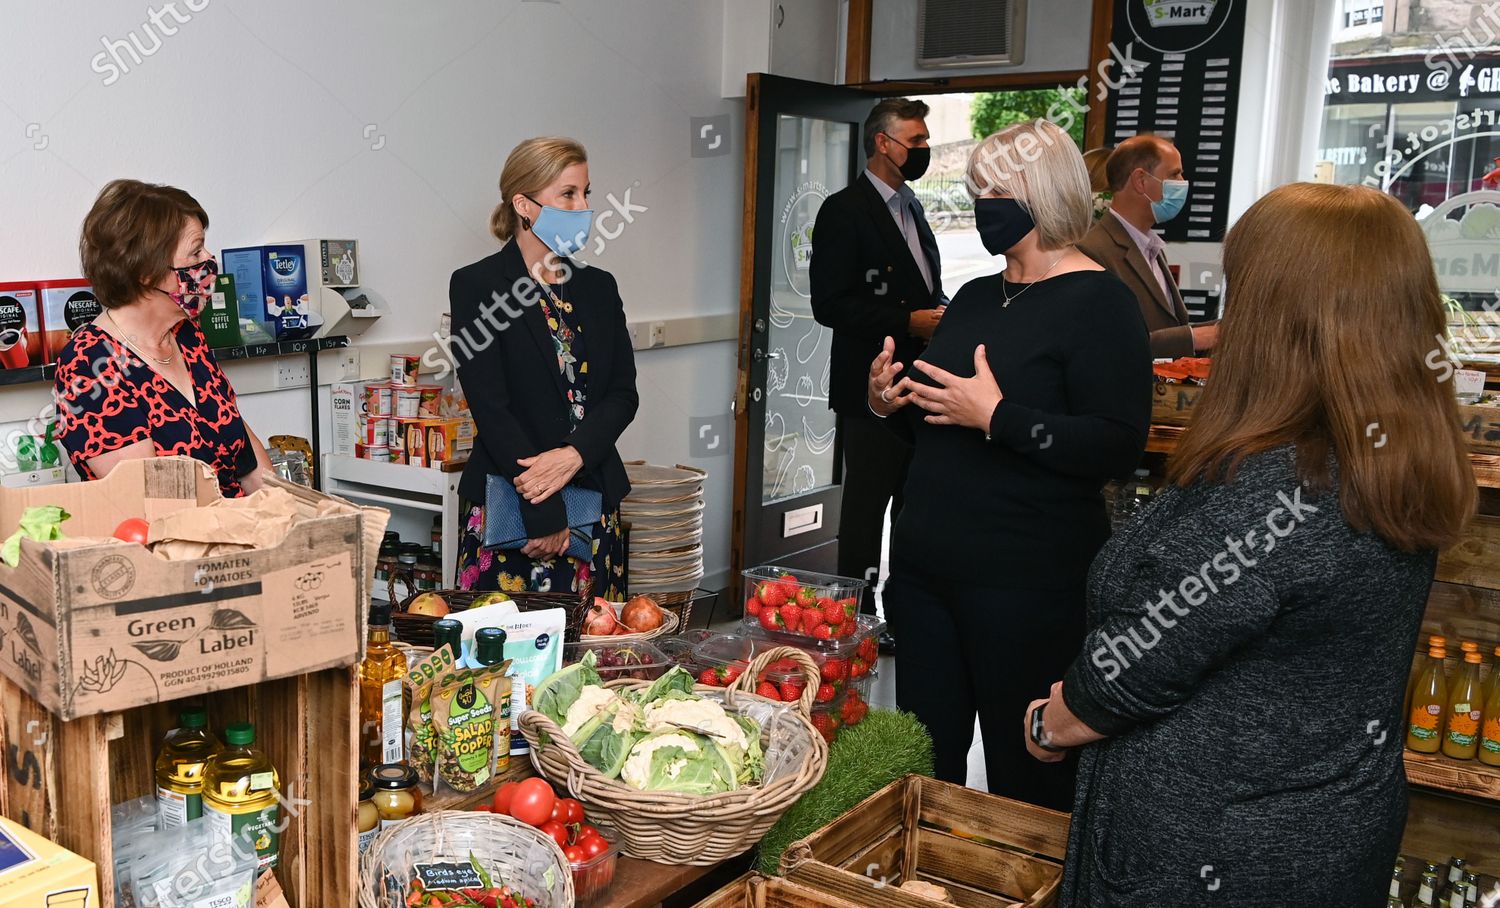 CASA REAL BRITÁNICA - Página 75 Prince-edward-and-sophie-countess-of-wessex-visit-to-s-mart-angus-forfar-scotland-uk-shutterstock-editorial-12172314n